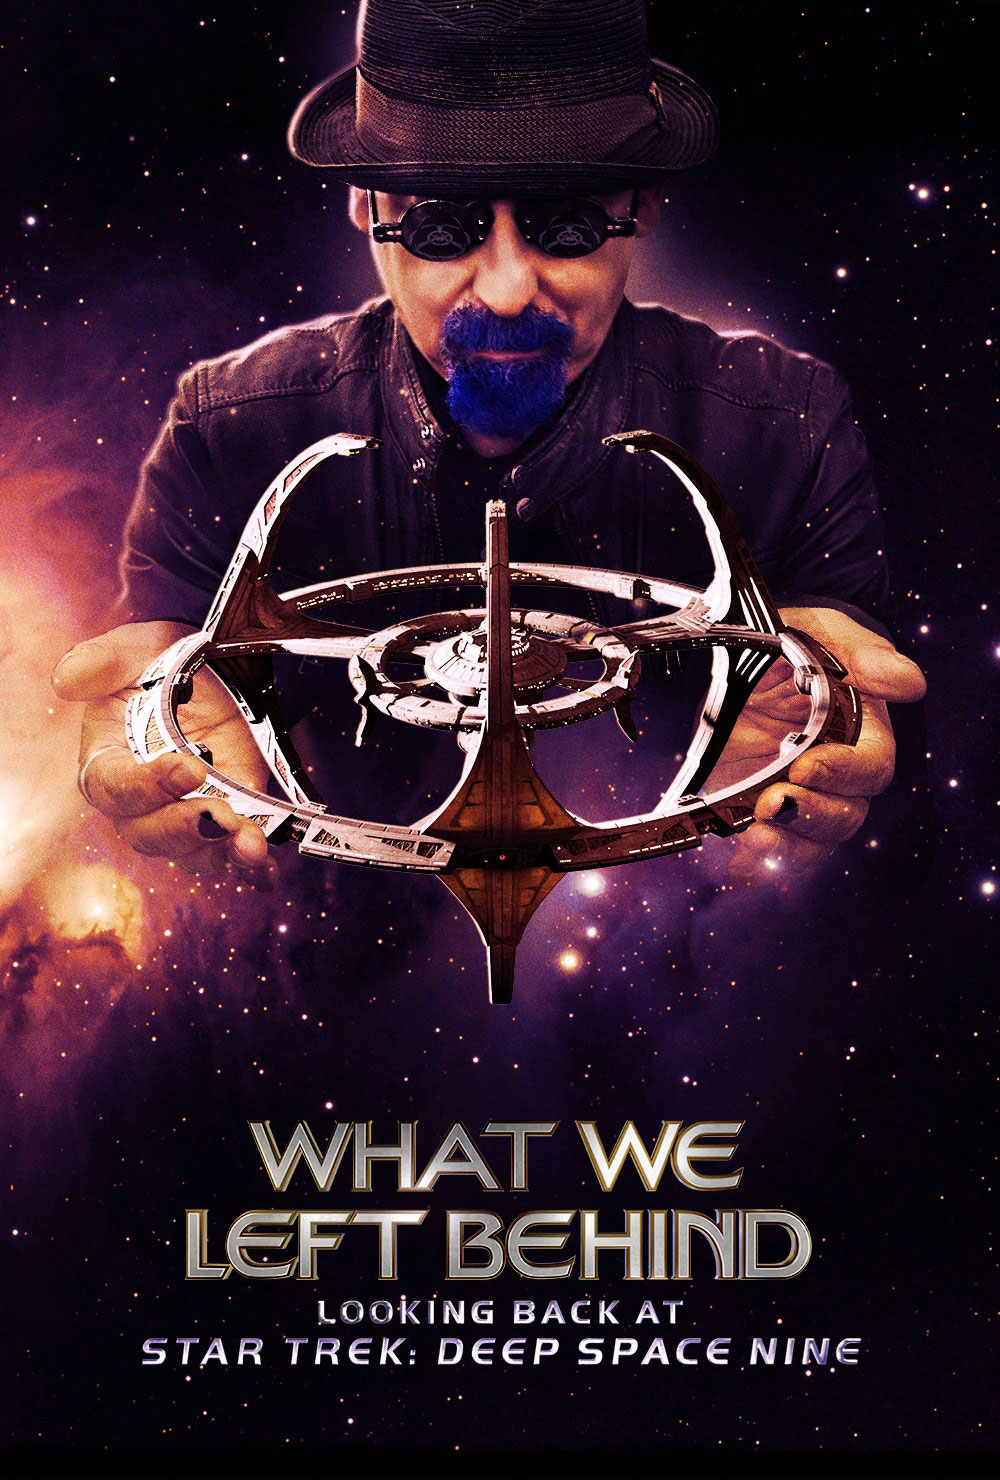 “What We Left Behind” poster